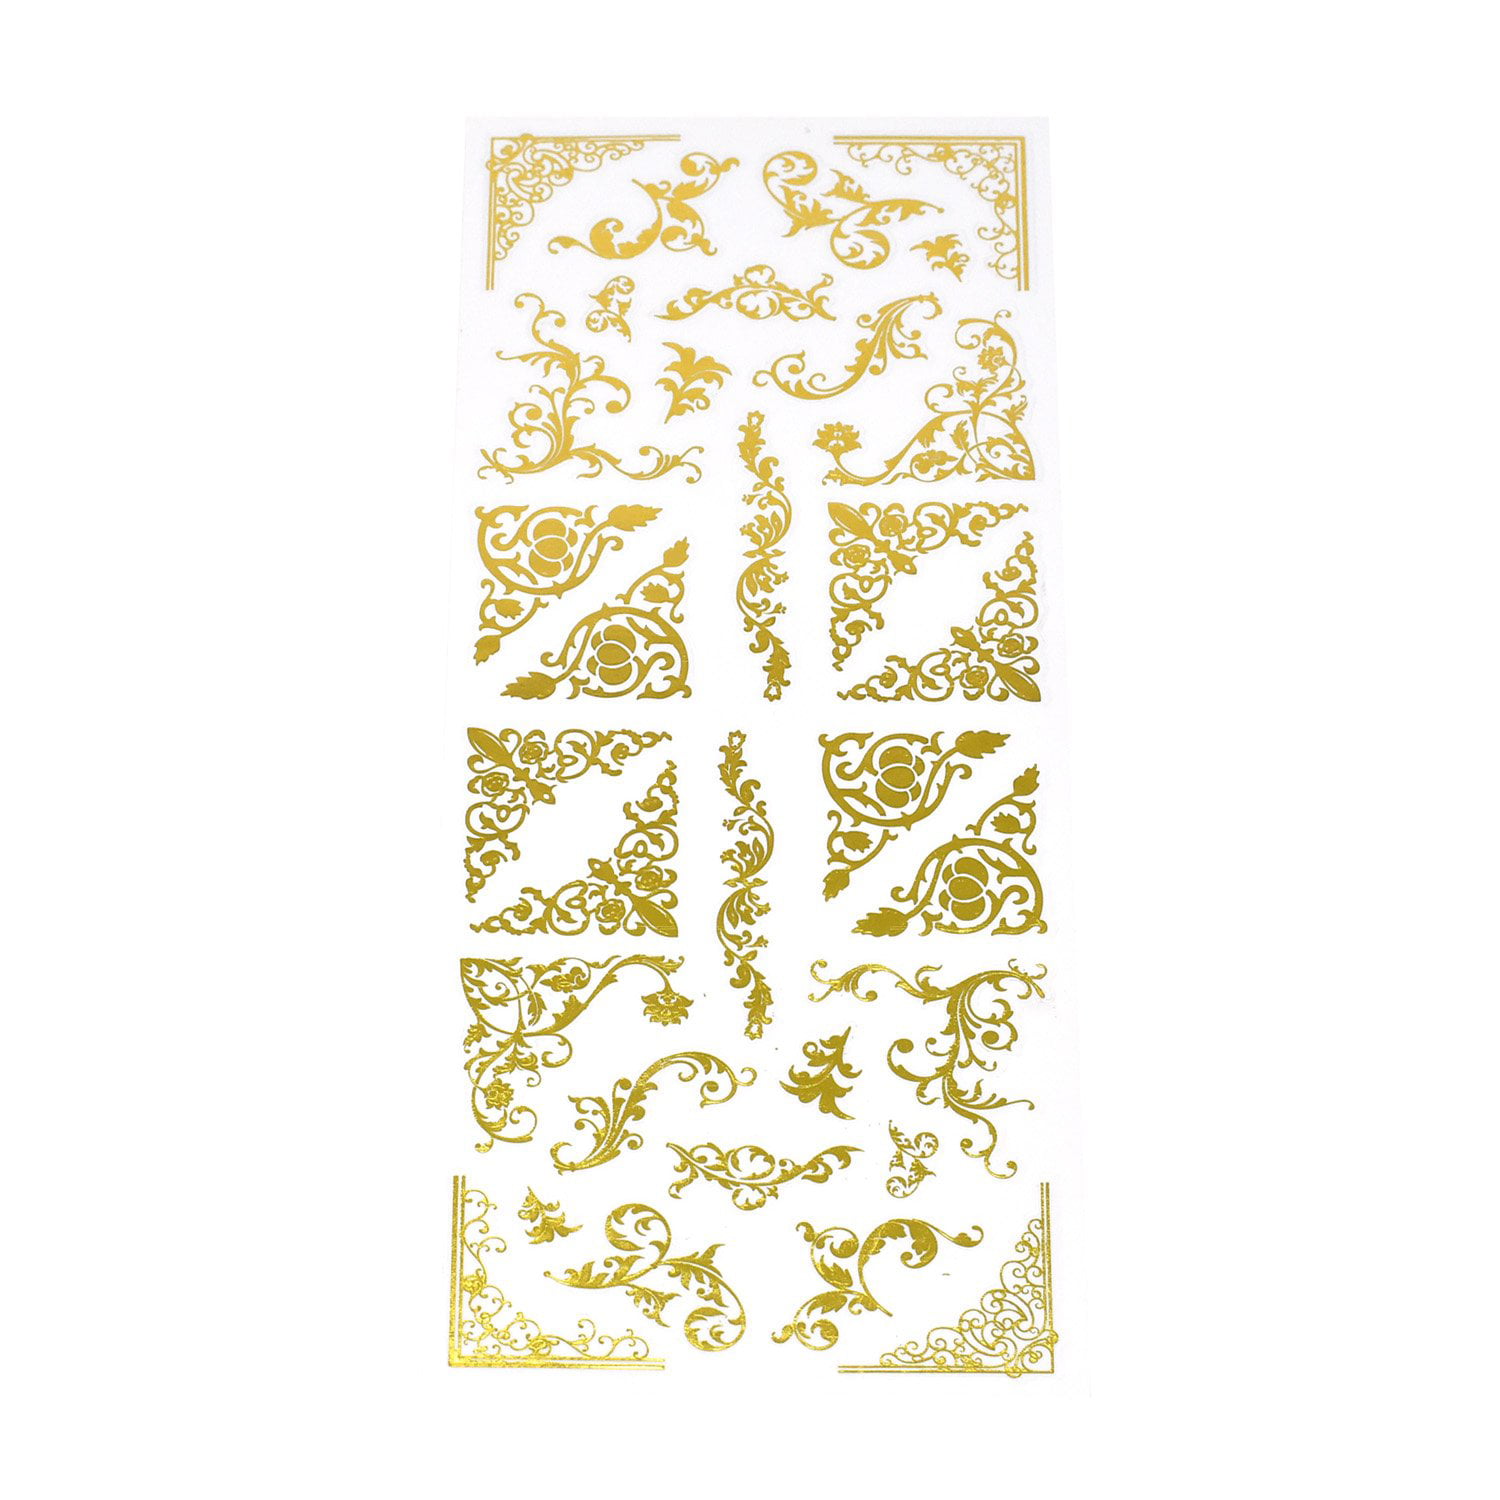 2X CRAFT STICKERS FOR SCRAPBOOKING NEW TRANPARANT GOLD CORNERS (STICK648)